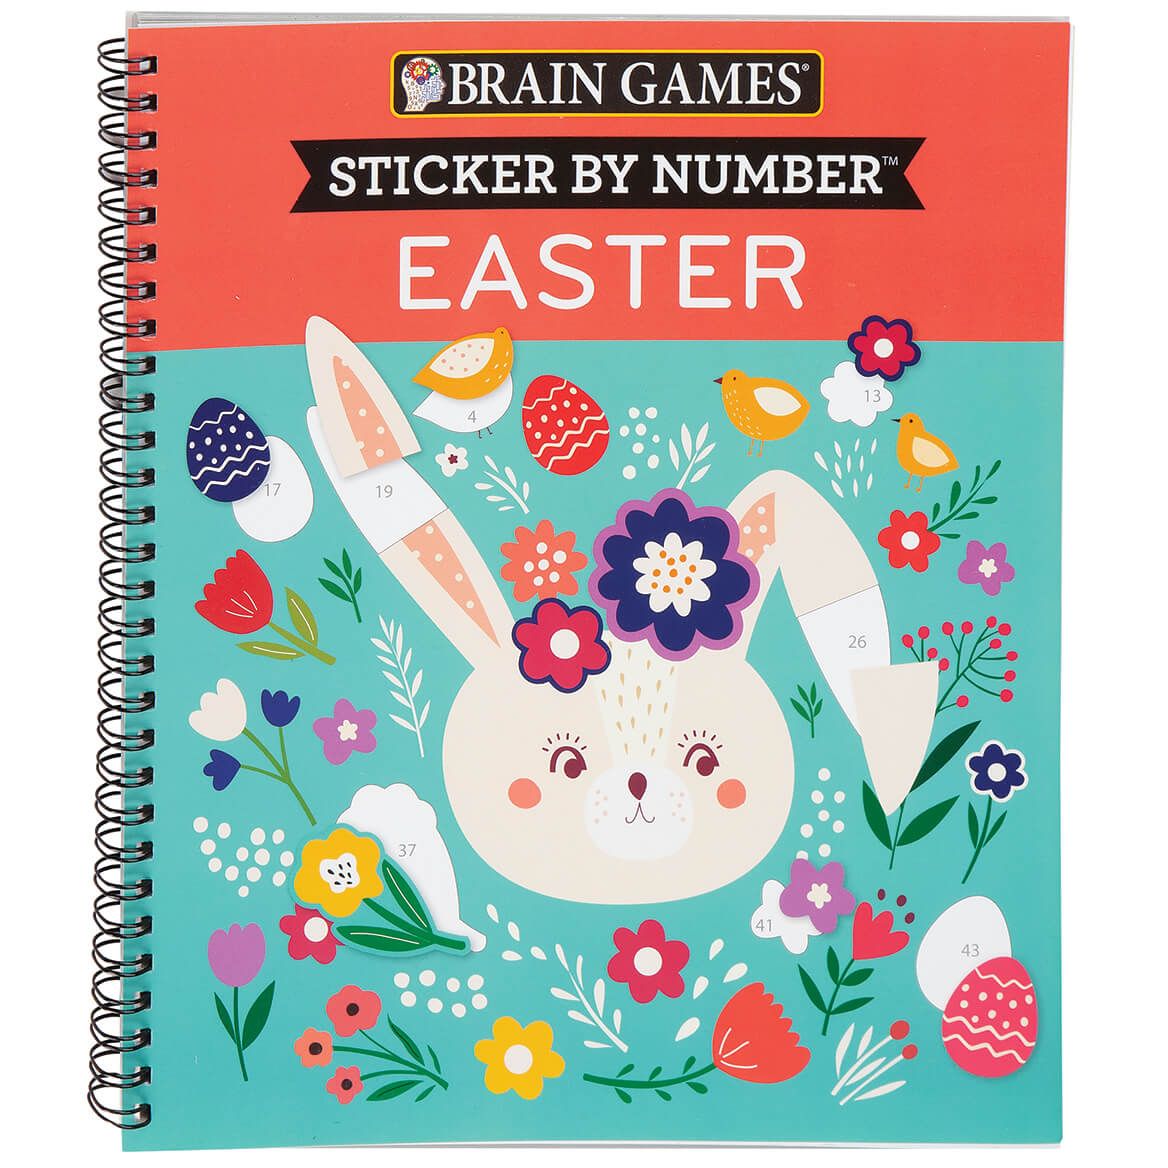 Brain Games® Sticker-By-Number™ Easter Book + '-' + 374638